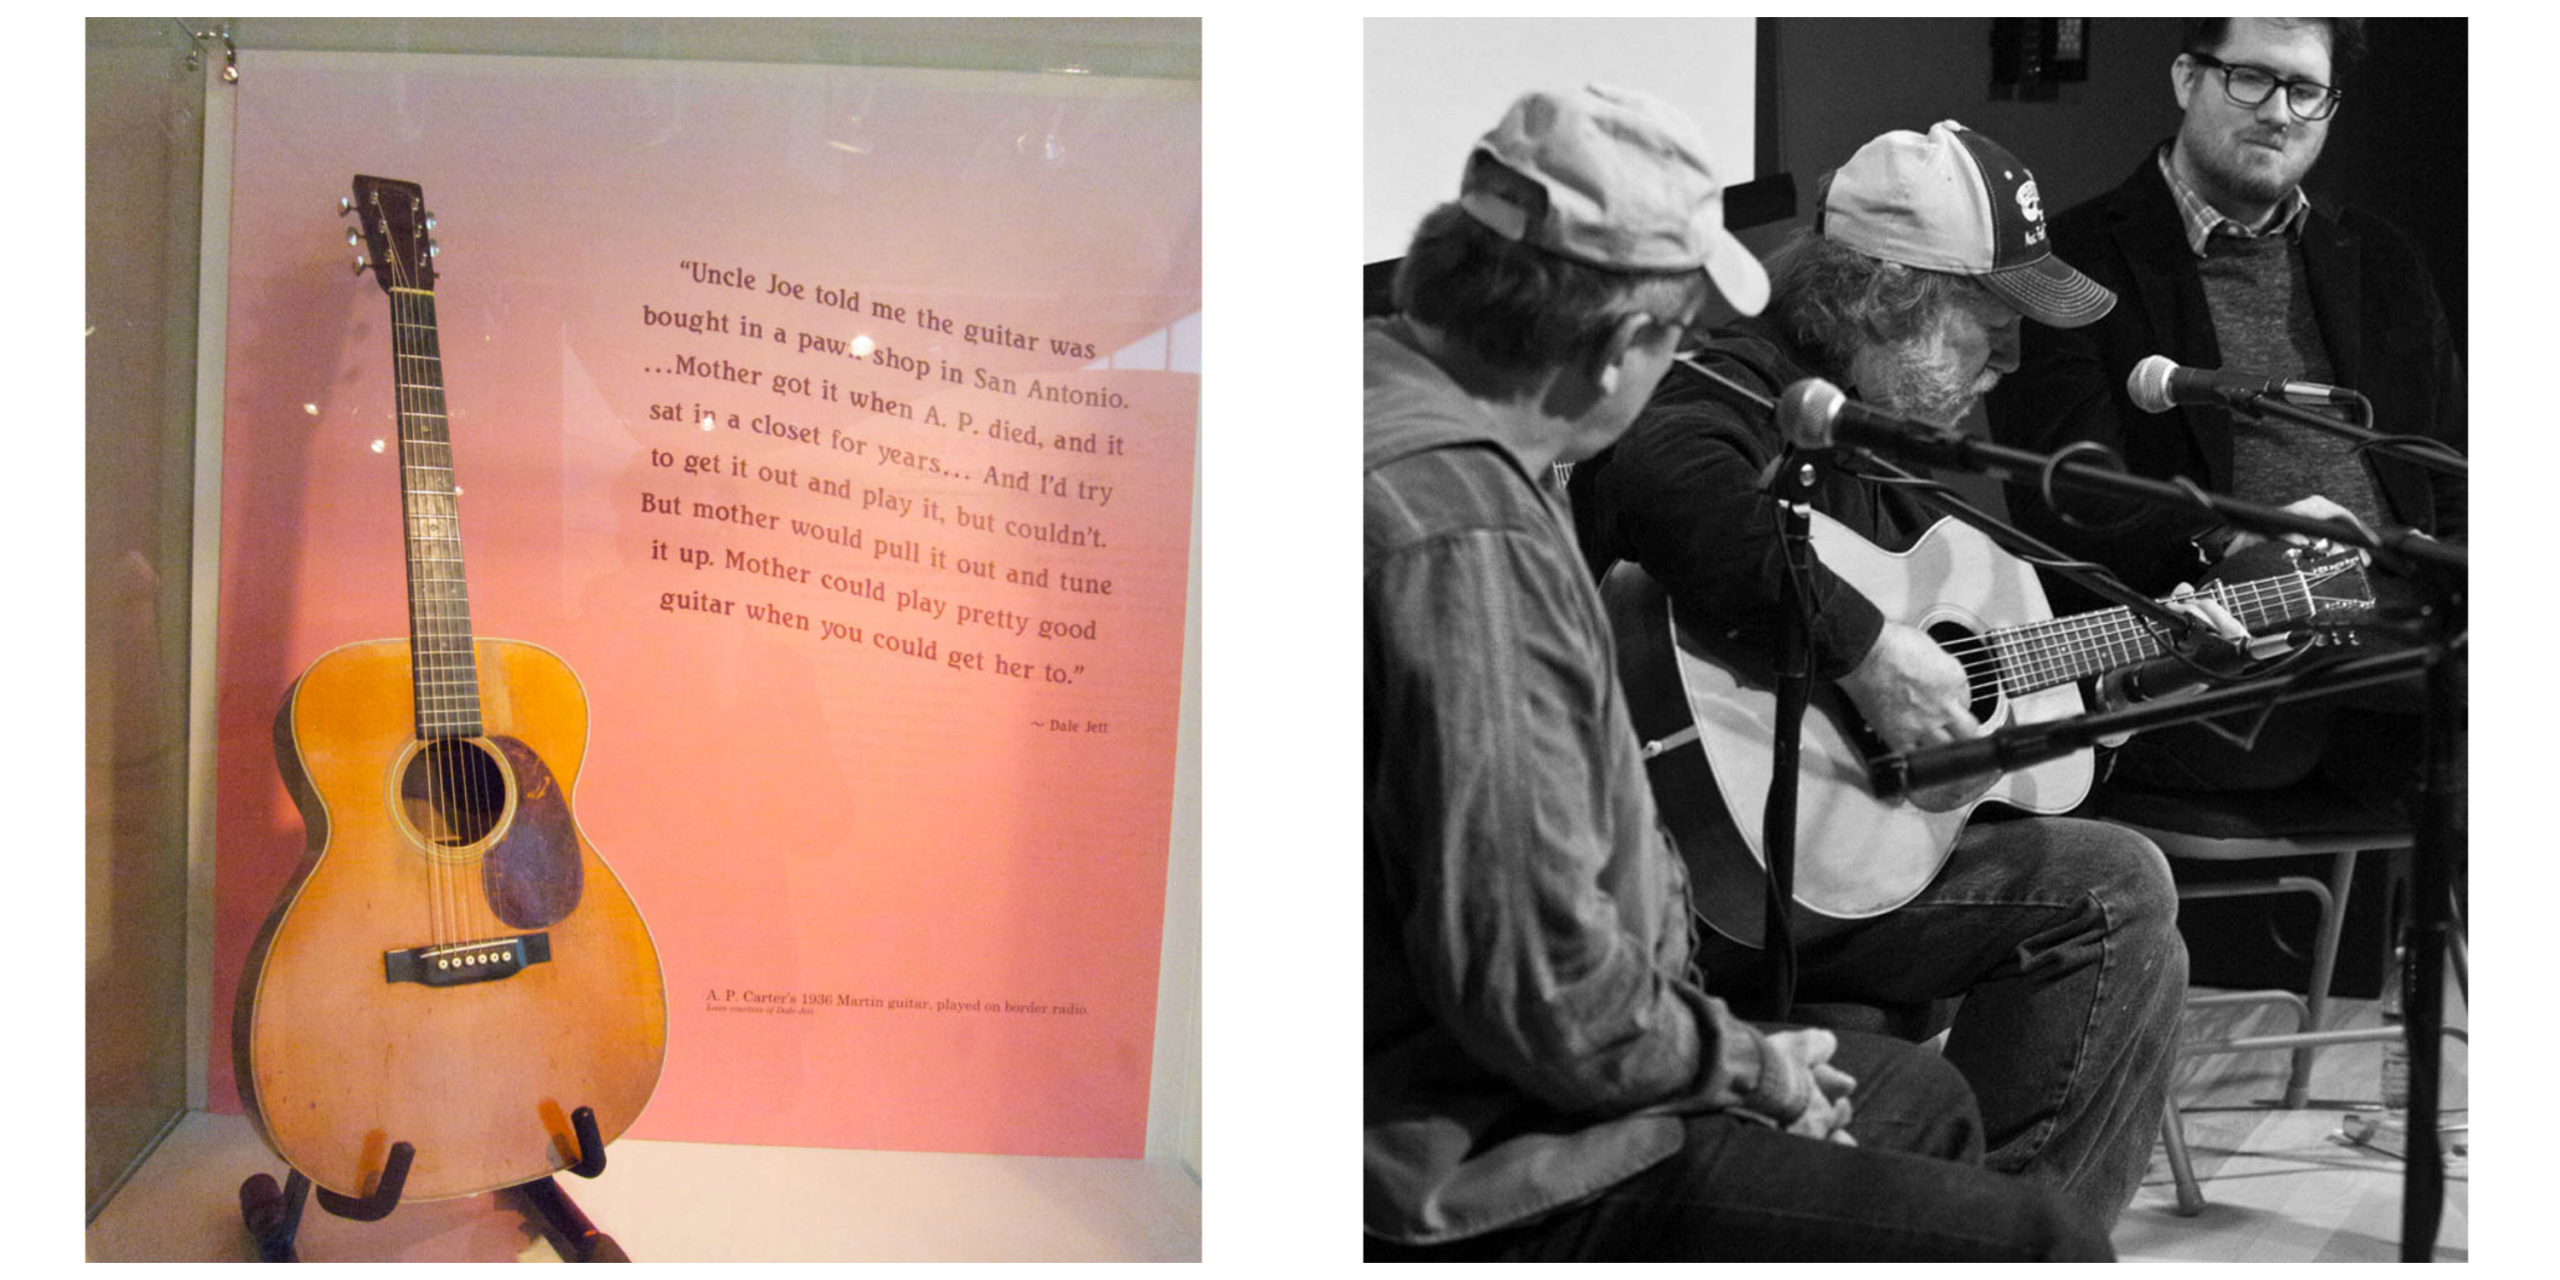 Left: A.P. Carter's guitar on display in a case at the museum -- behind the guitar is a pink-shaded panel with a quote from Dale Jett about the guitar. Right: Dale Jett, Wayne Henderson playing the A.P. Carter guitar, and a member of staff at the museum, on stage in the Performance Theater.